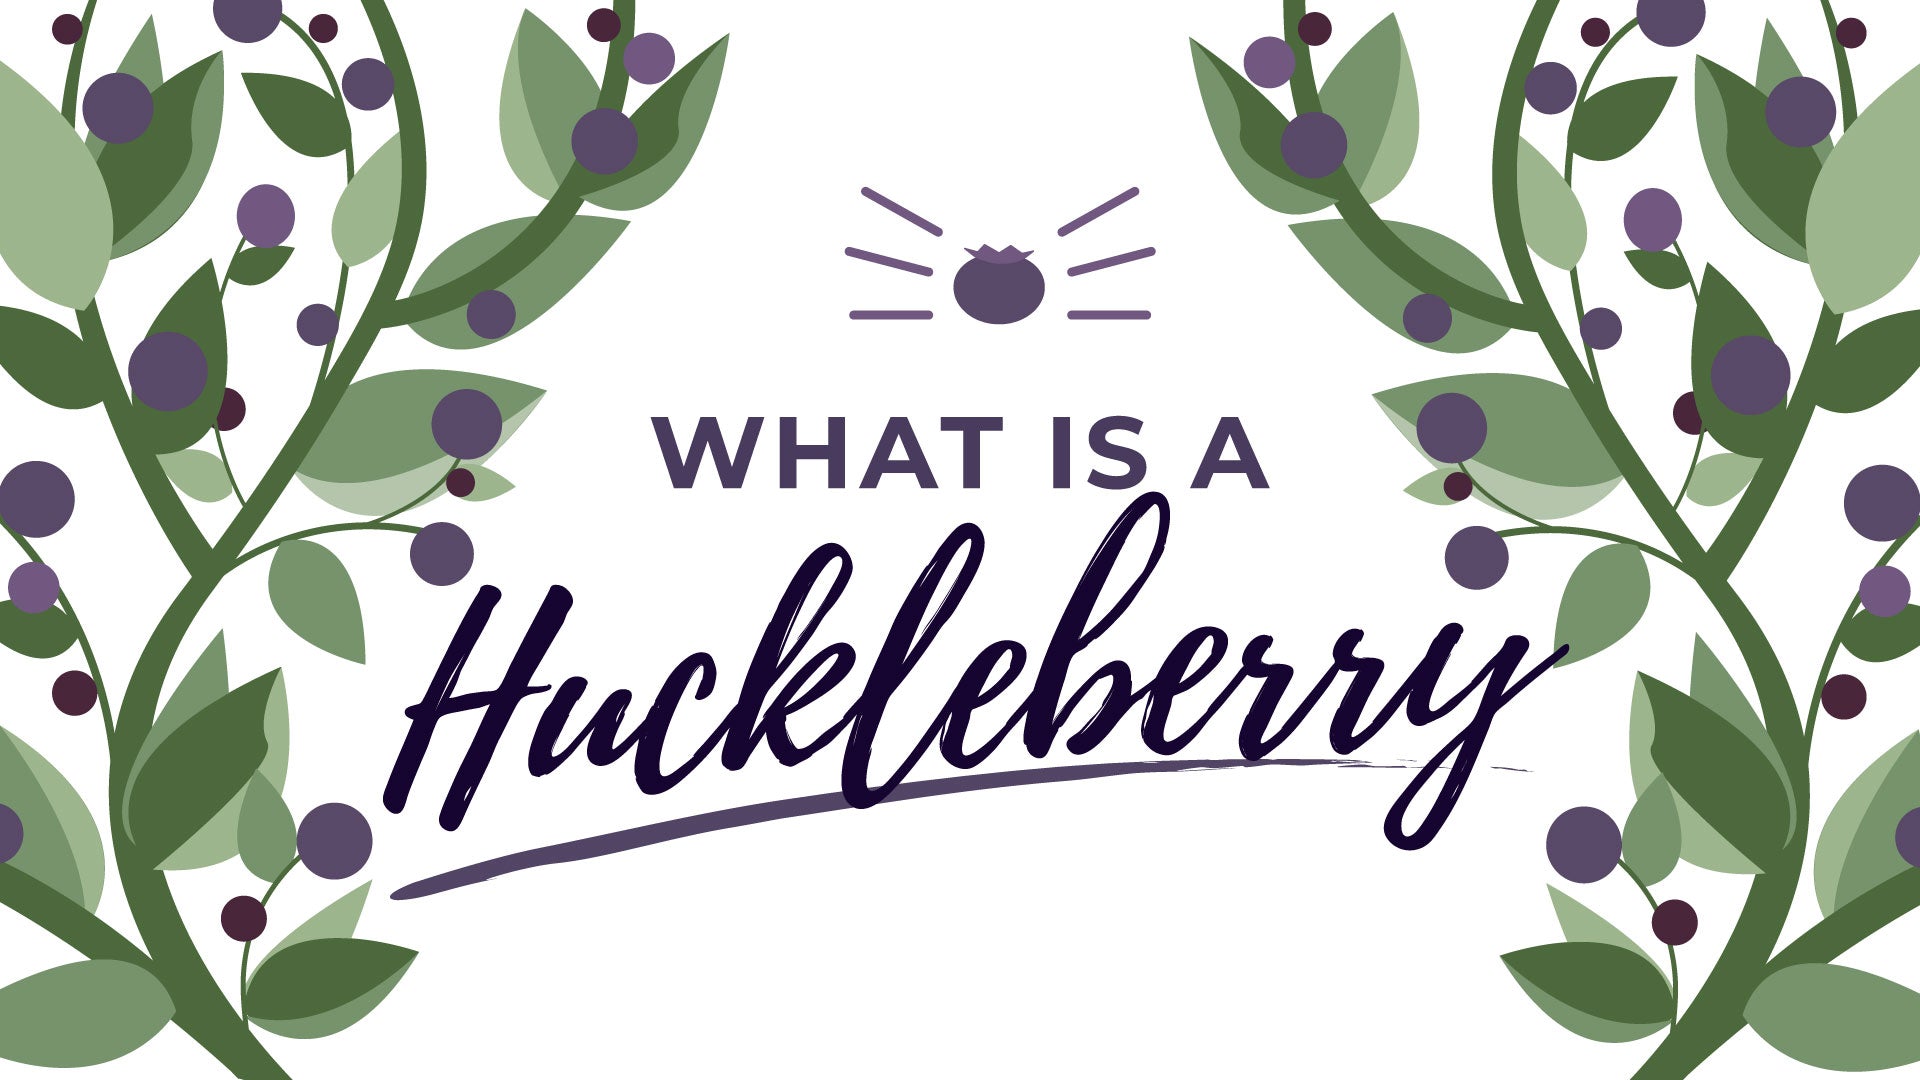 What is a Huckleberry? And other FAQ from Montana Gift Corral, the #1 seller of Huckleberry Gifts